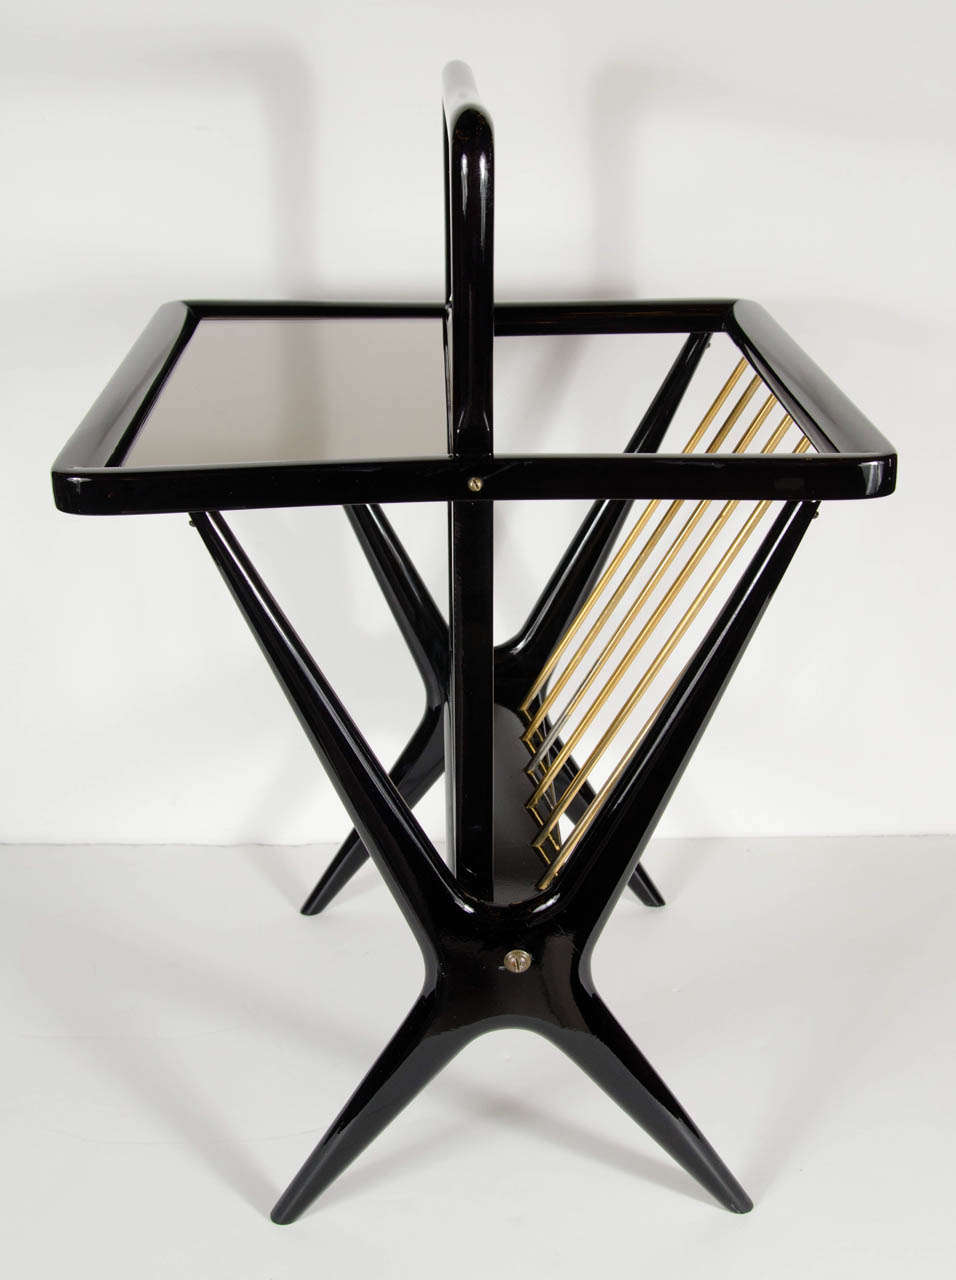 Italian Ultra Chic Mid-Century Modernist Table/Magazine Stand in the Manner of Gio Ponti